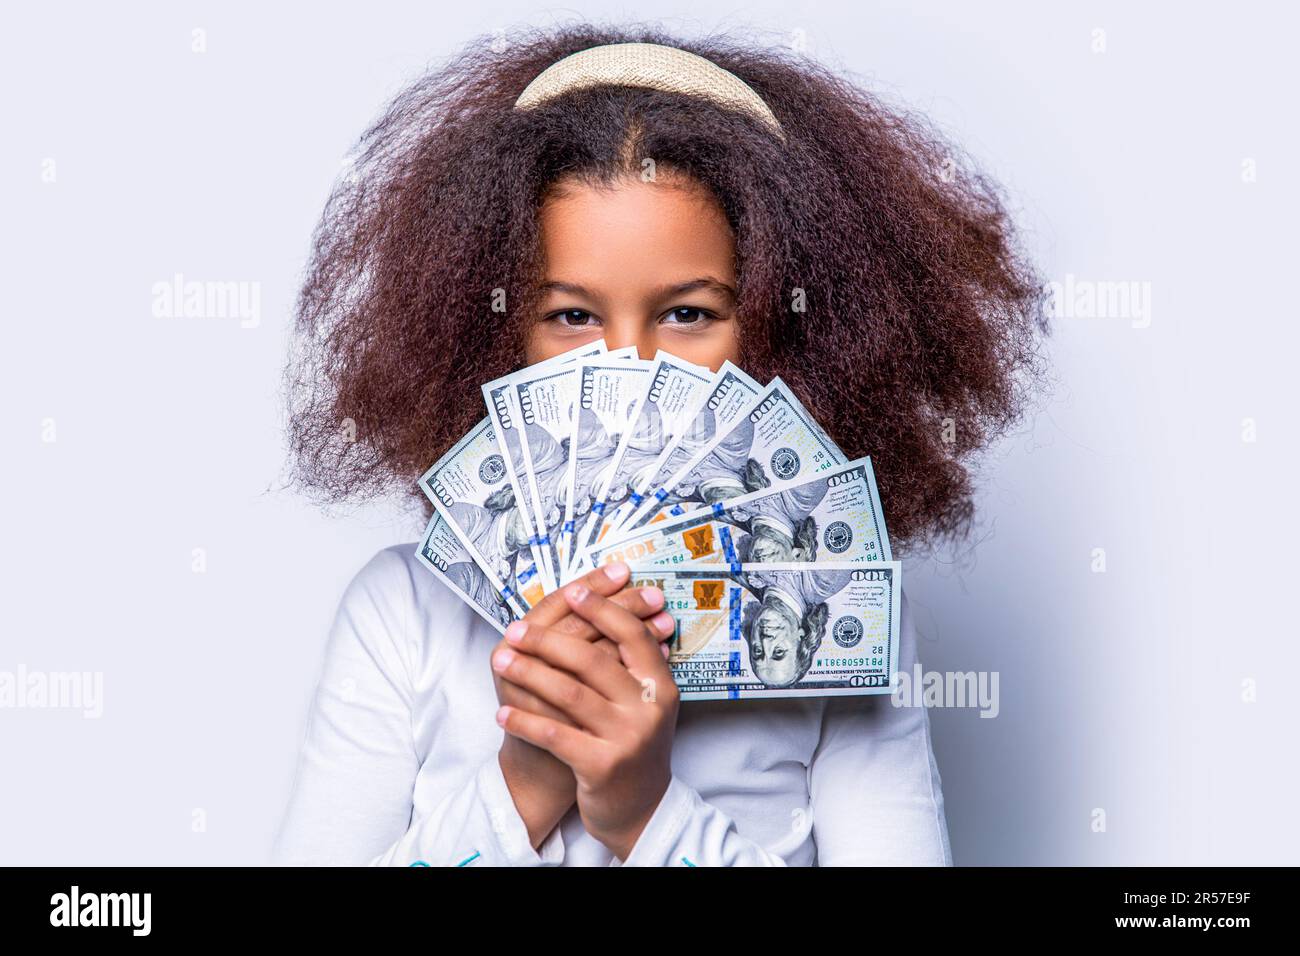 Premium Photo  Woman smiling with white teeth and holding lots of money in  dollar currency